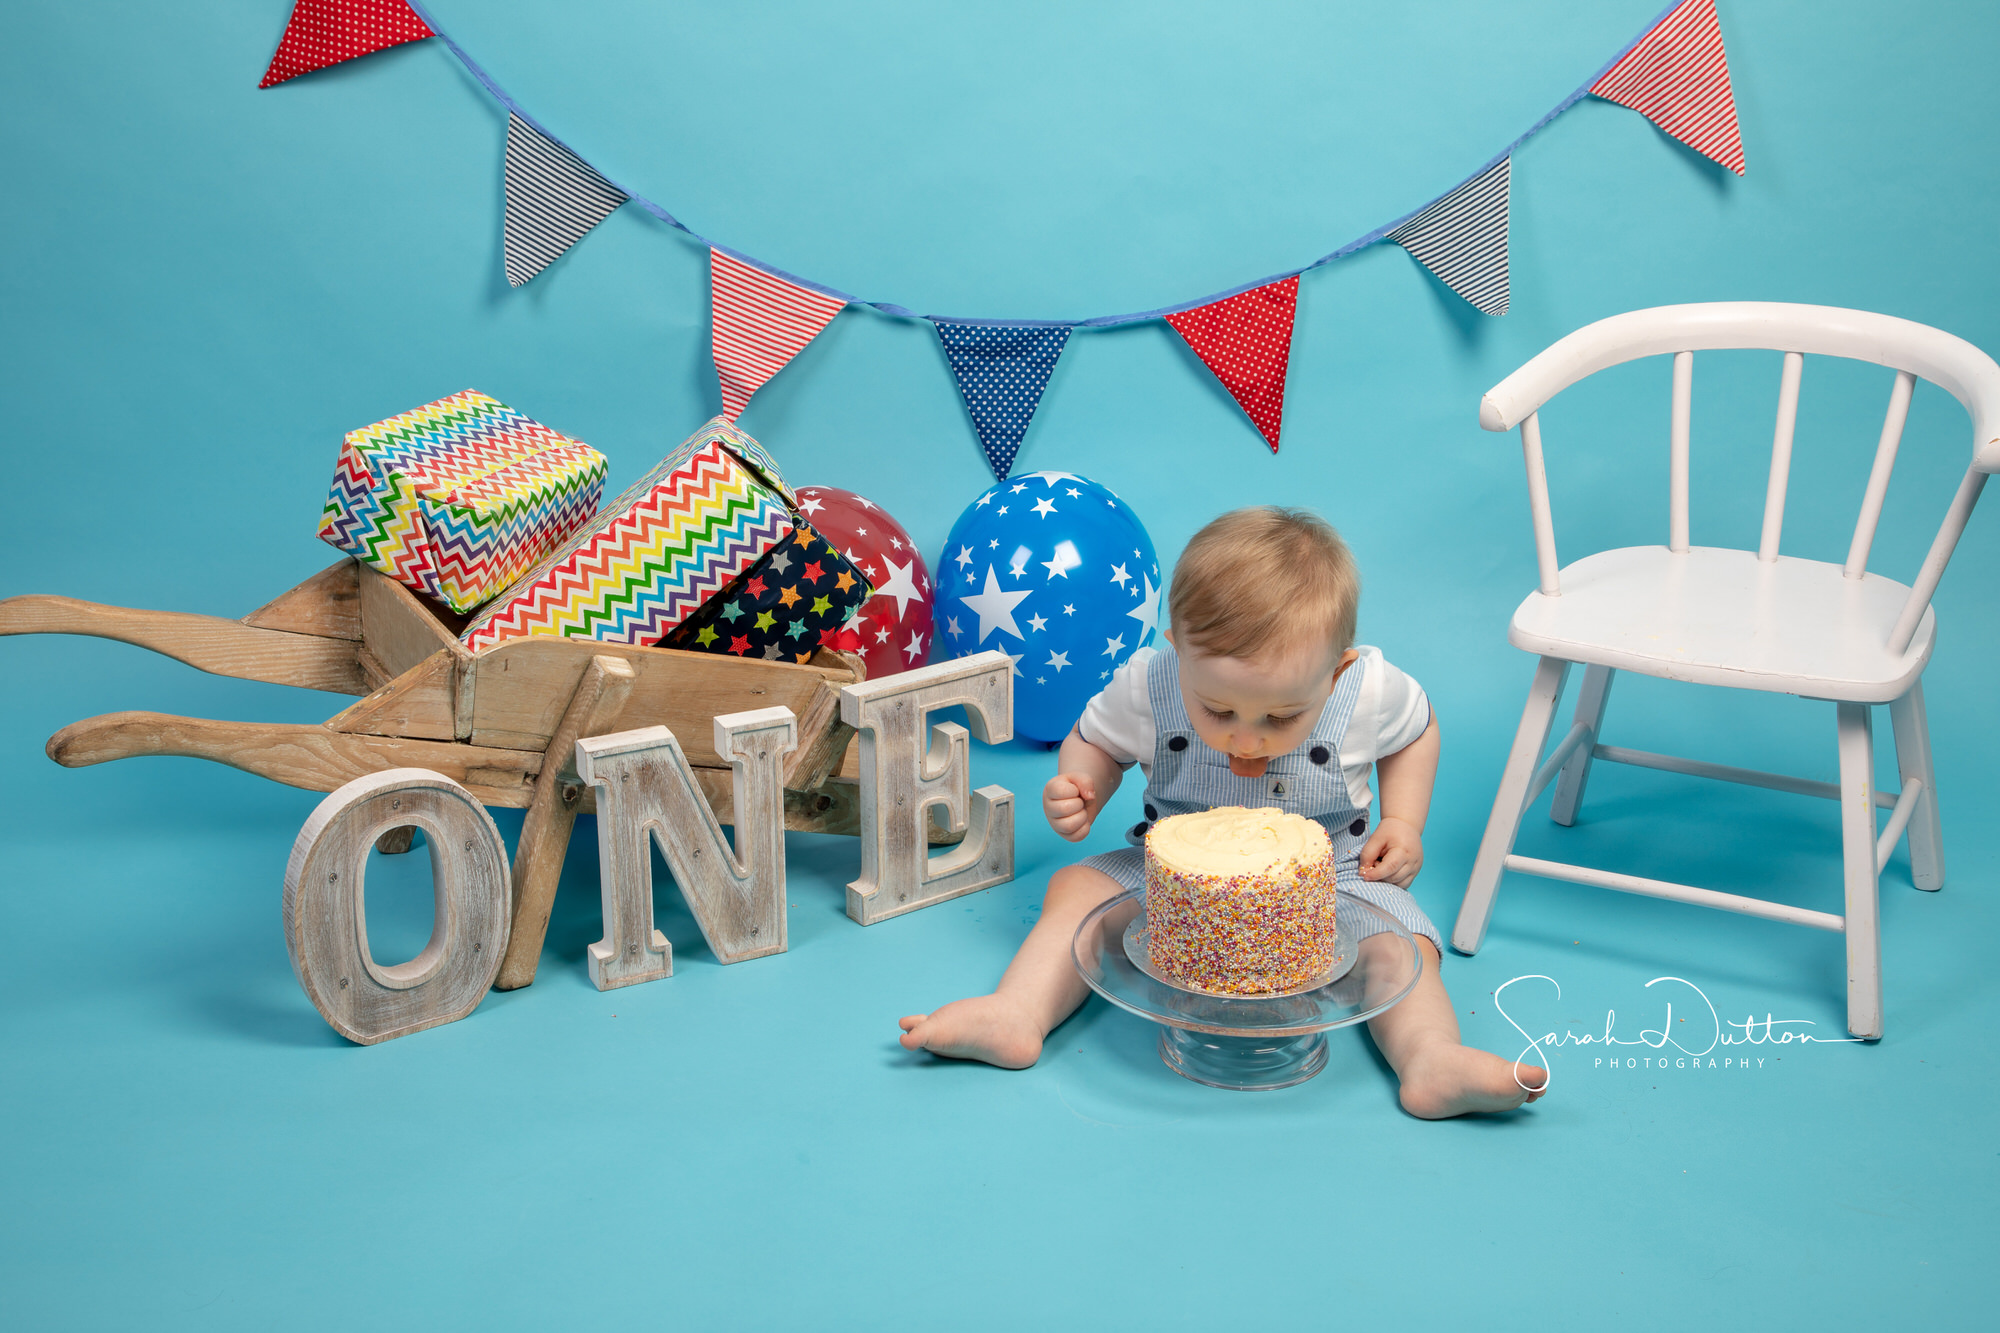 Cake Smash, Family and Baby Photography taken in the Photography studio in Whitchurch Hampshire